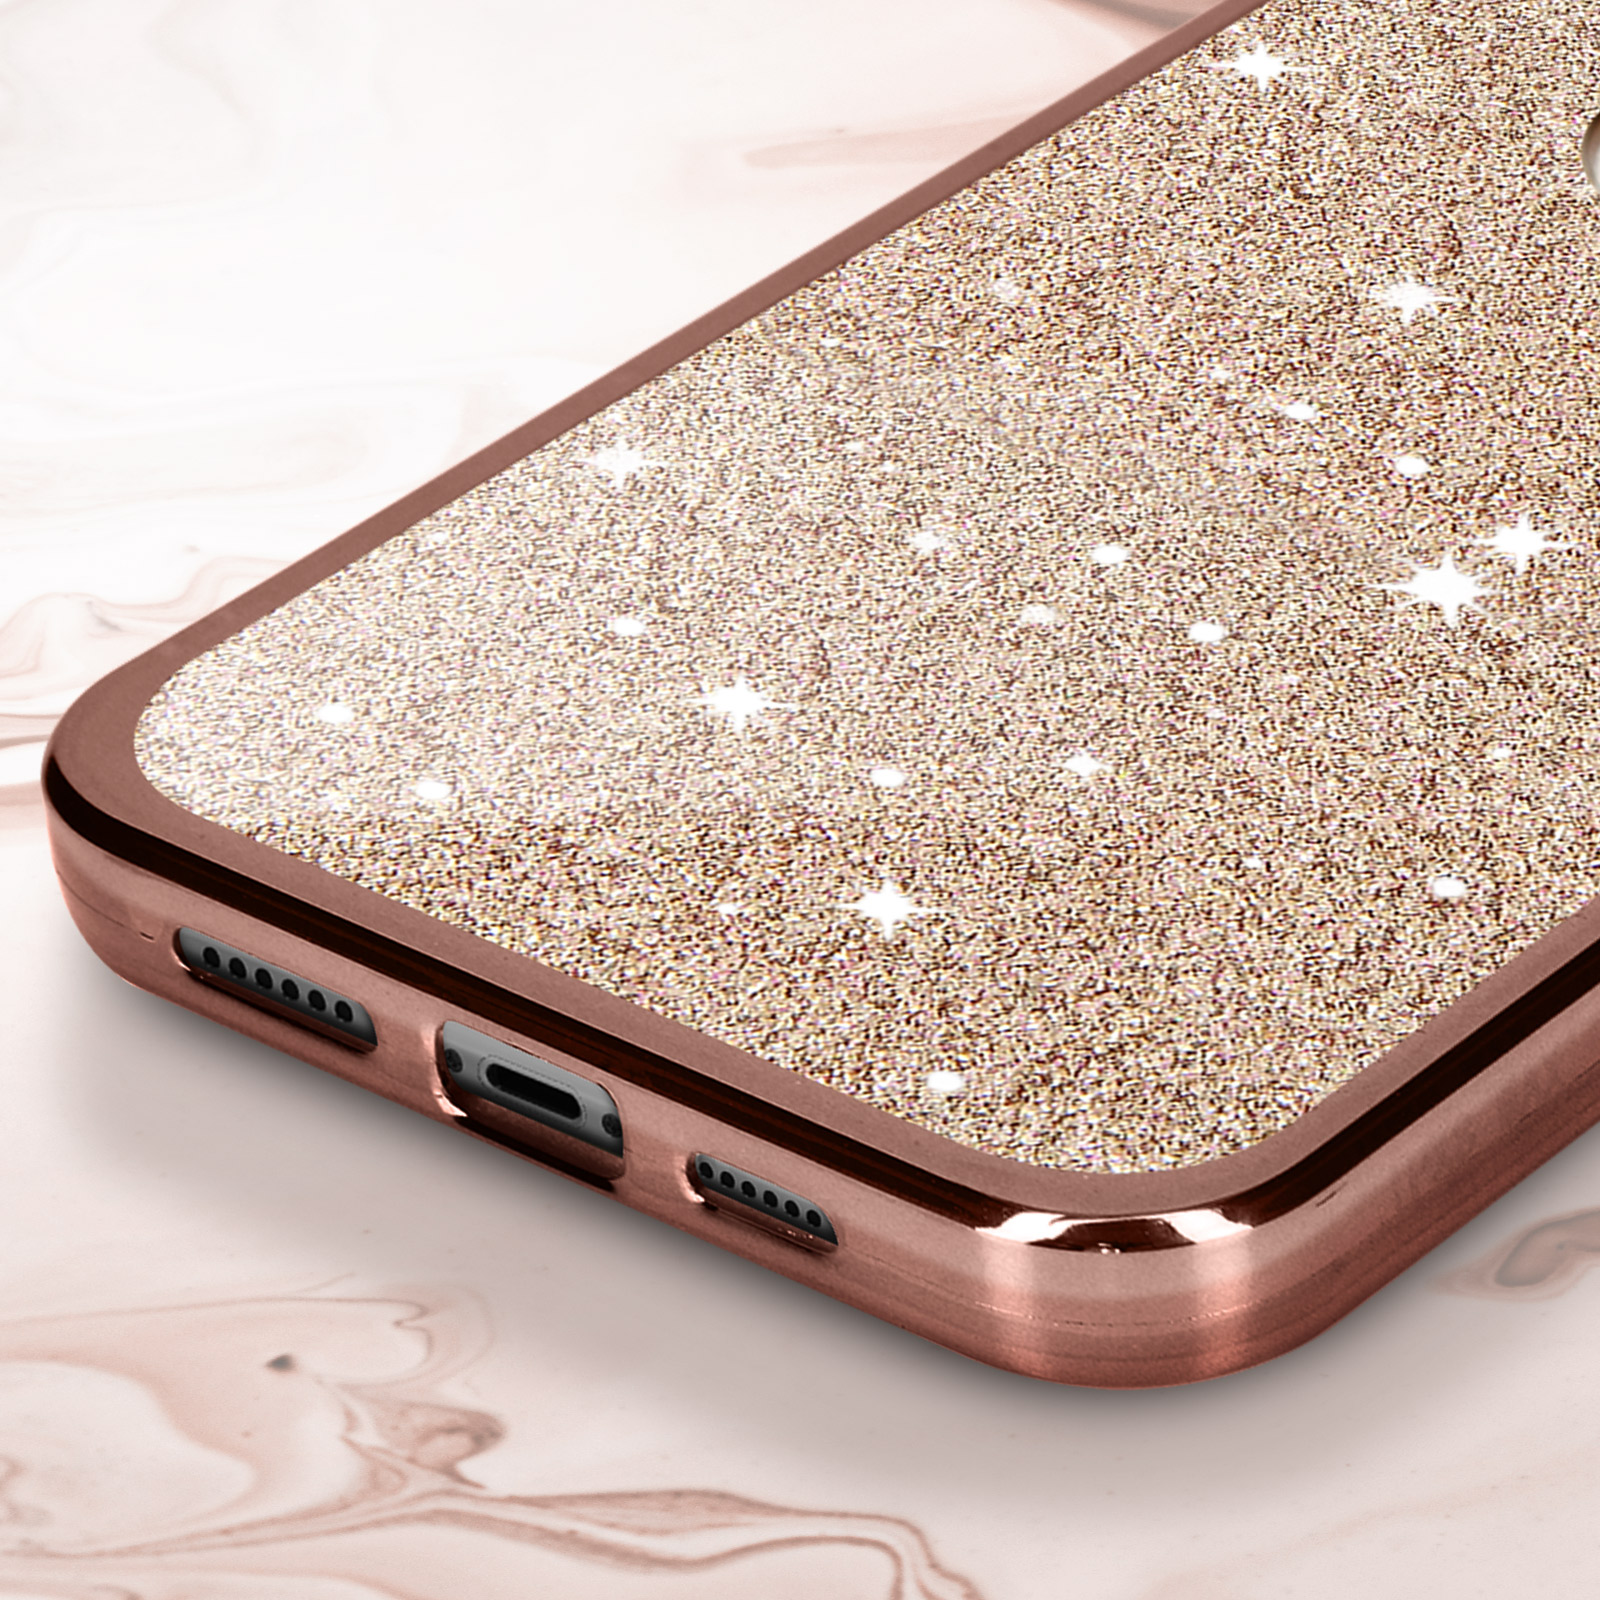 AVIZAR Protecam Spark Series, Backcover, Rosegold iPhone Max, Apple, XS